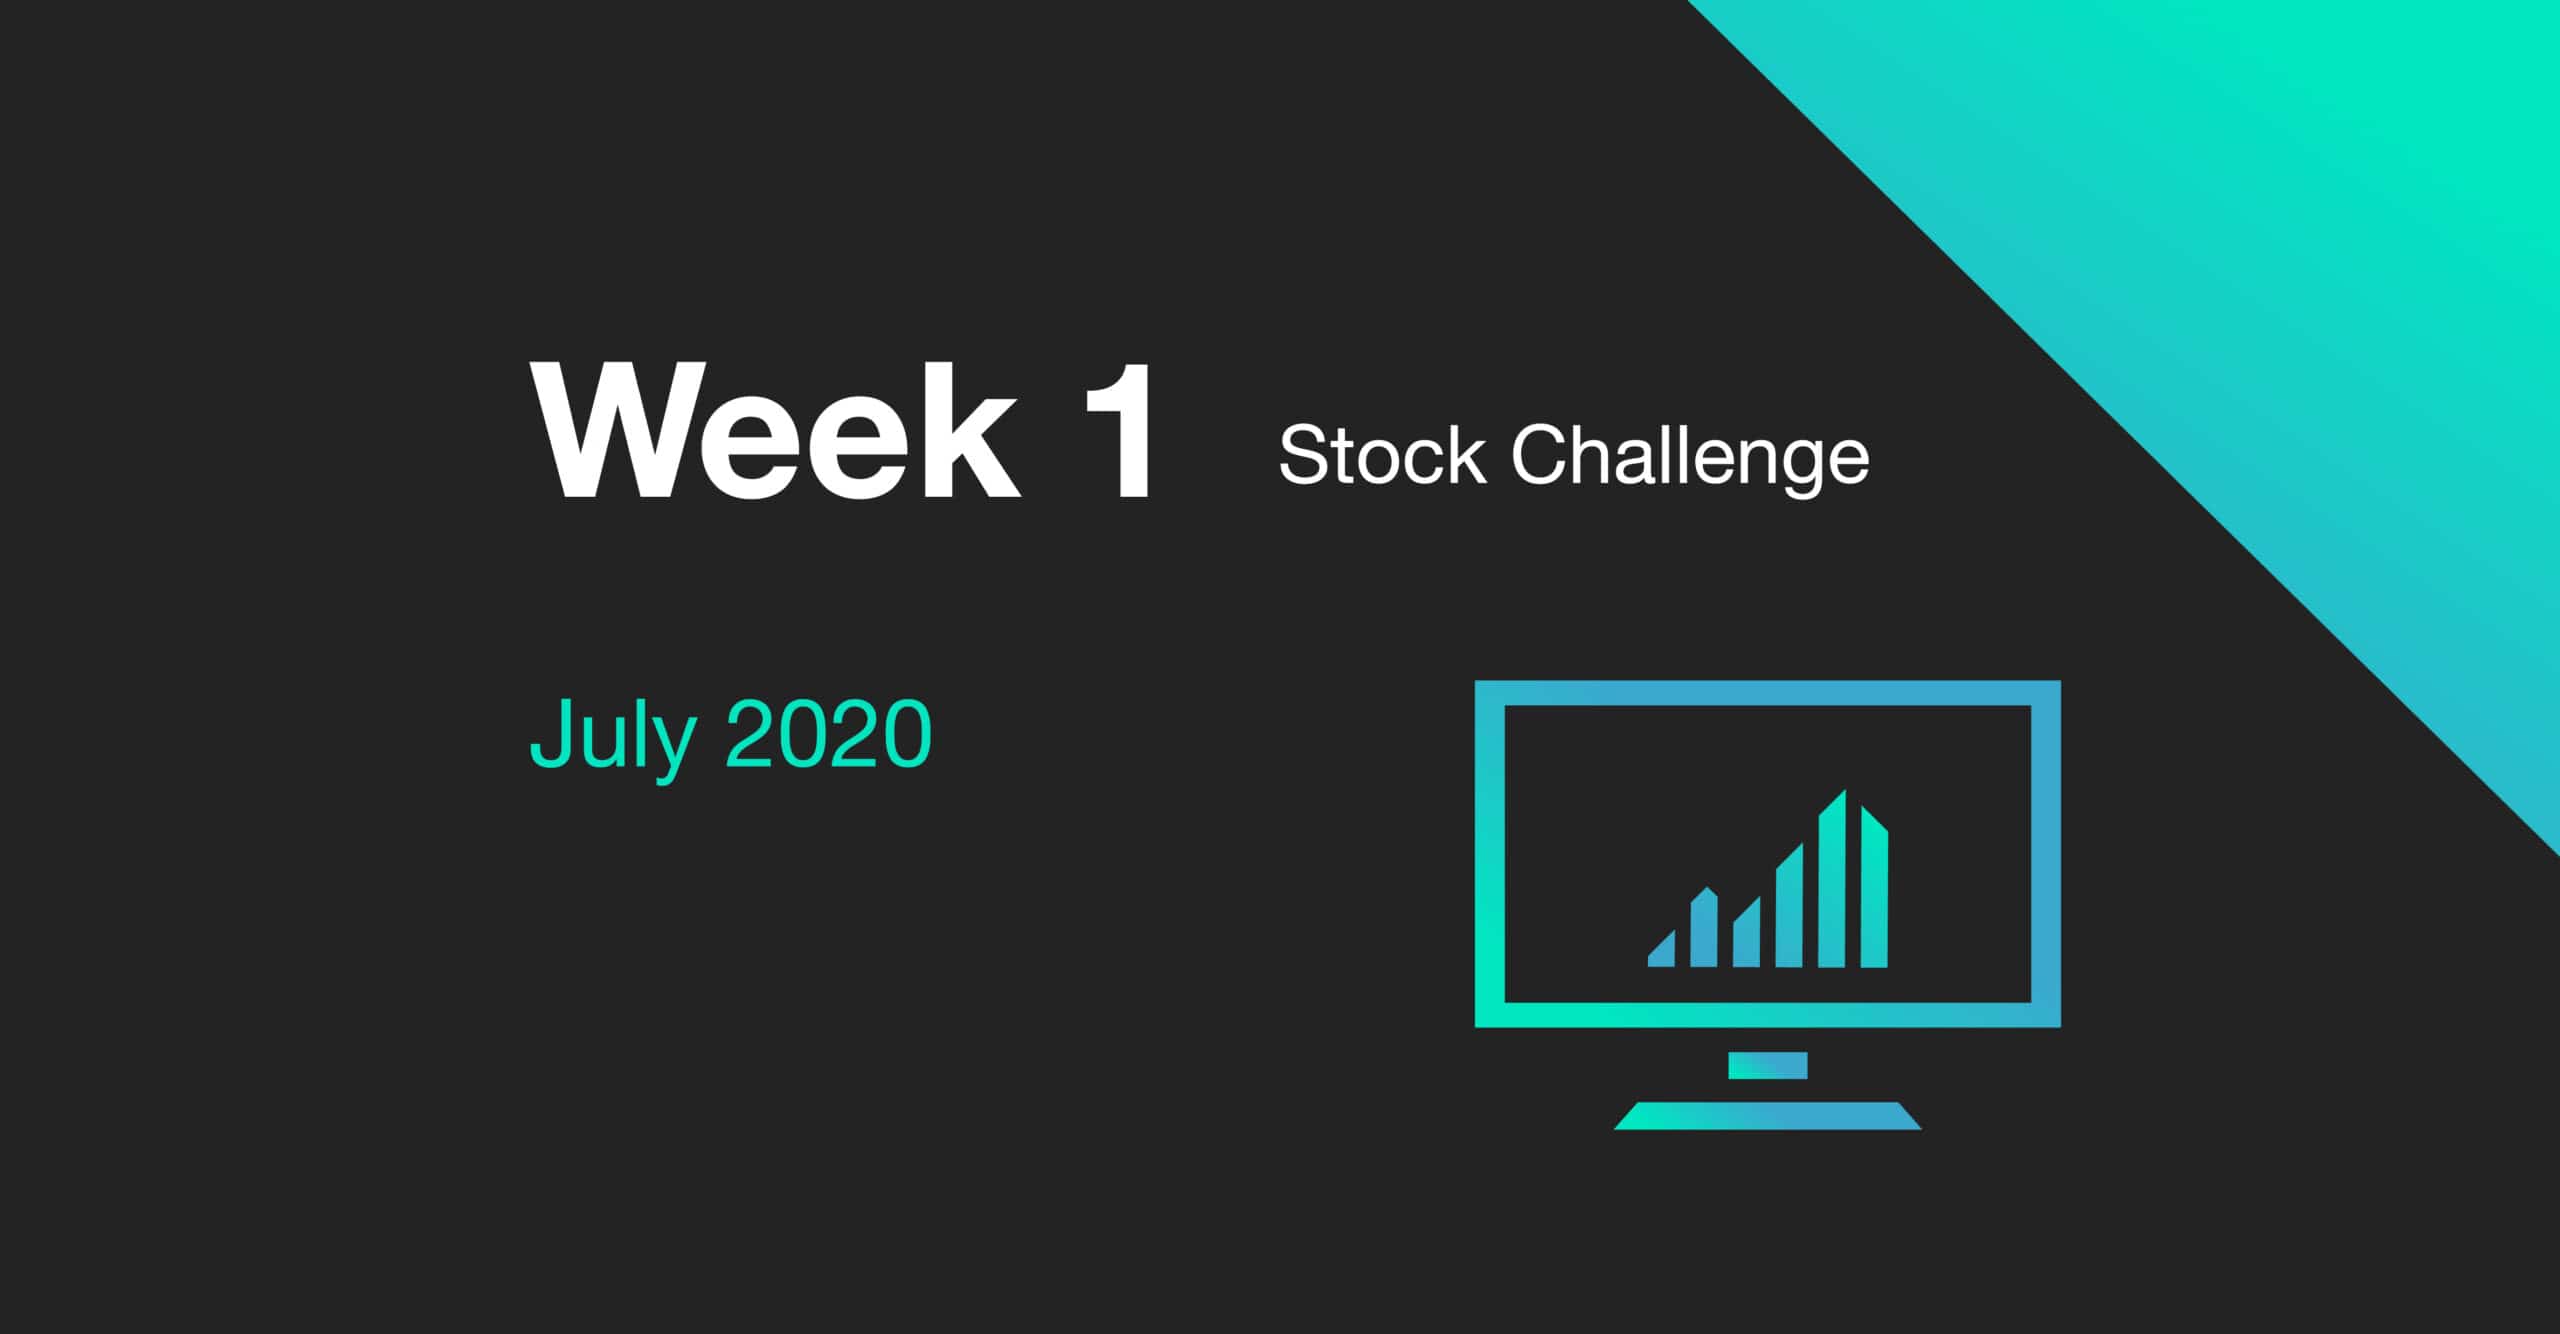 Week 1 of the July 2020 Stock Challenge